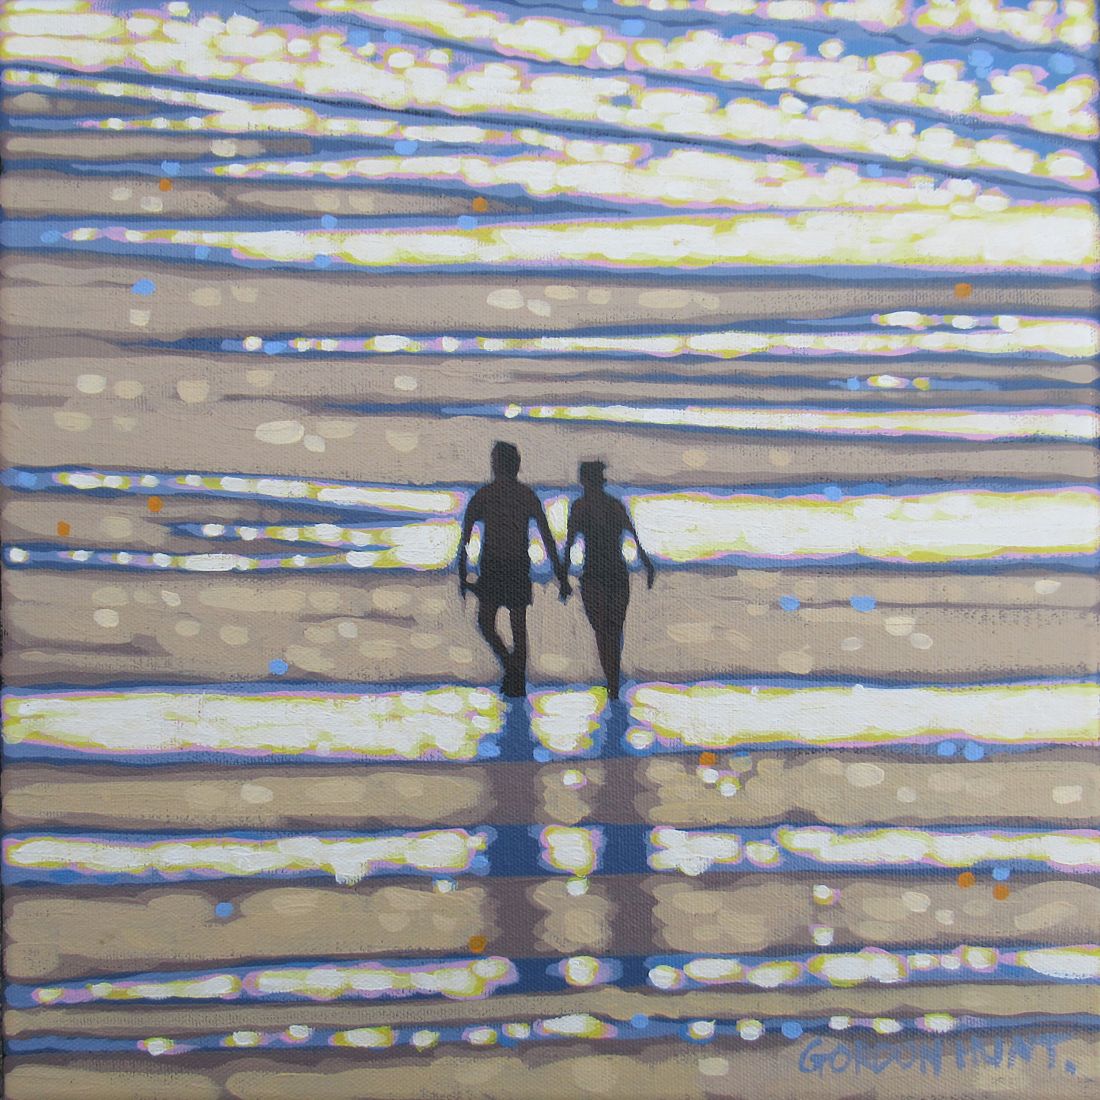 To walk on a beach in the sunshine by Gordon Hunt